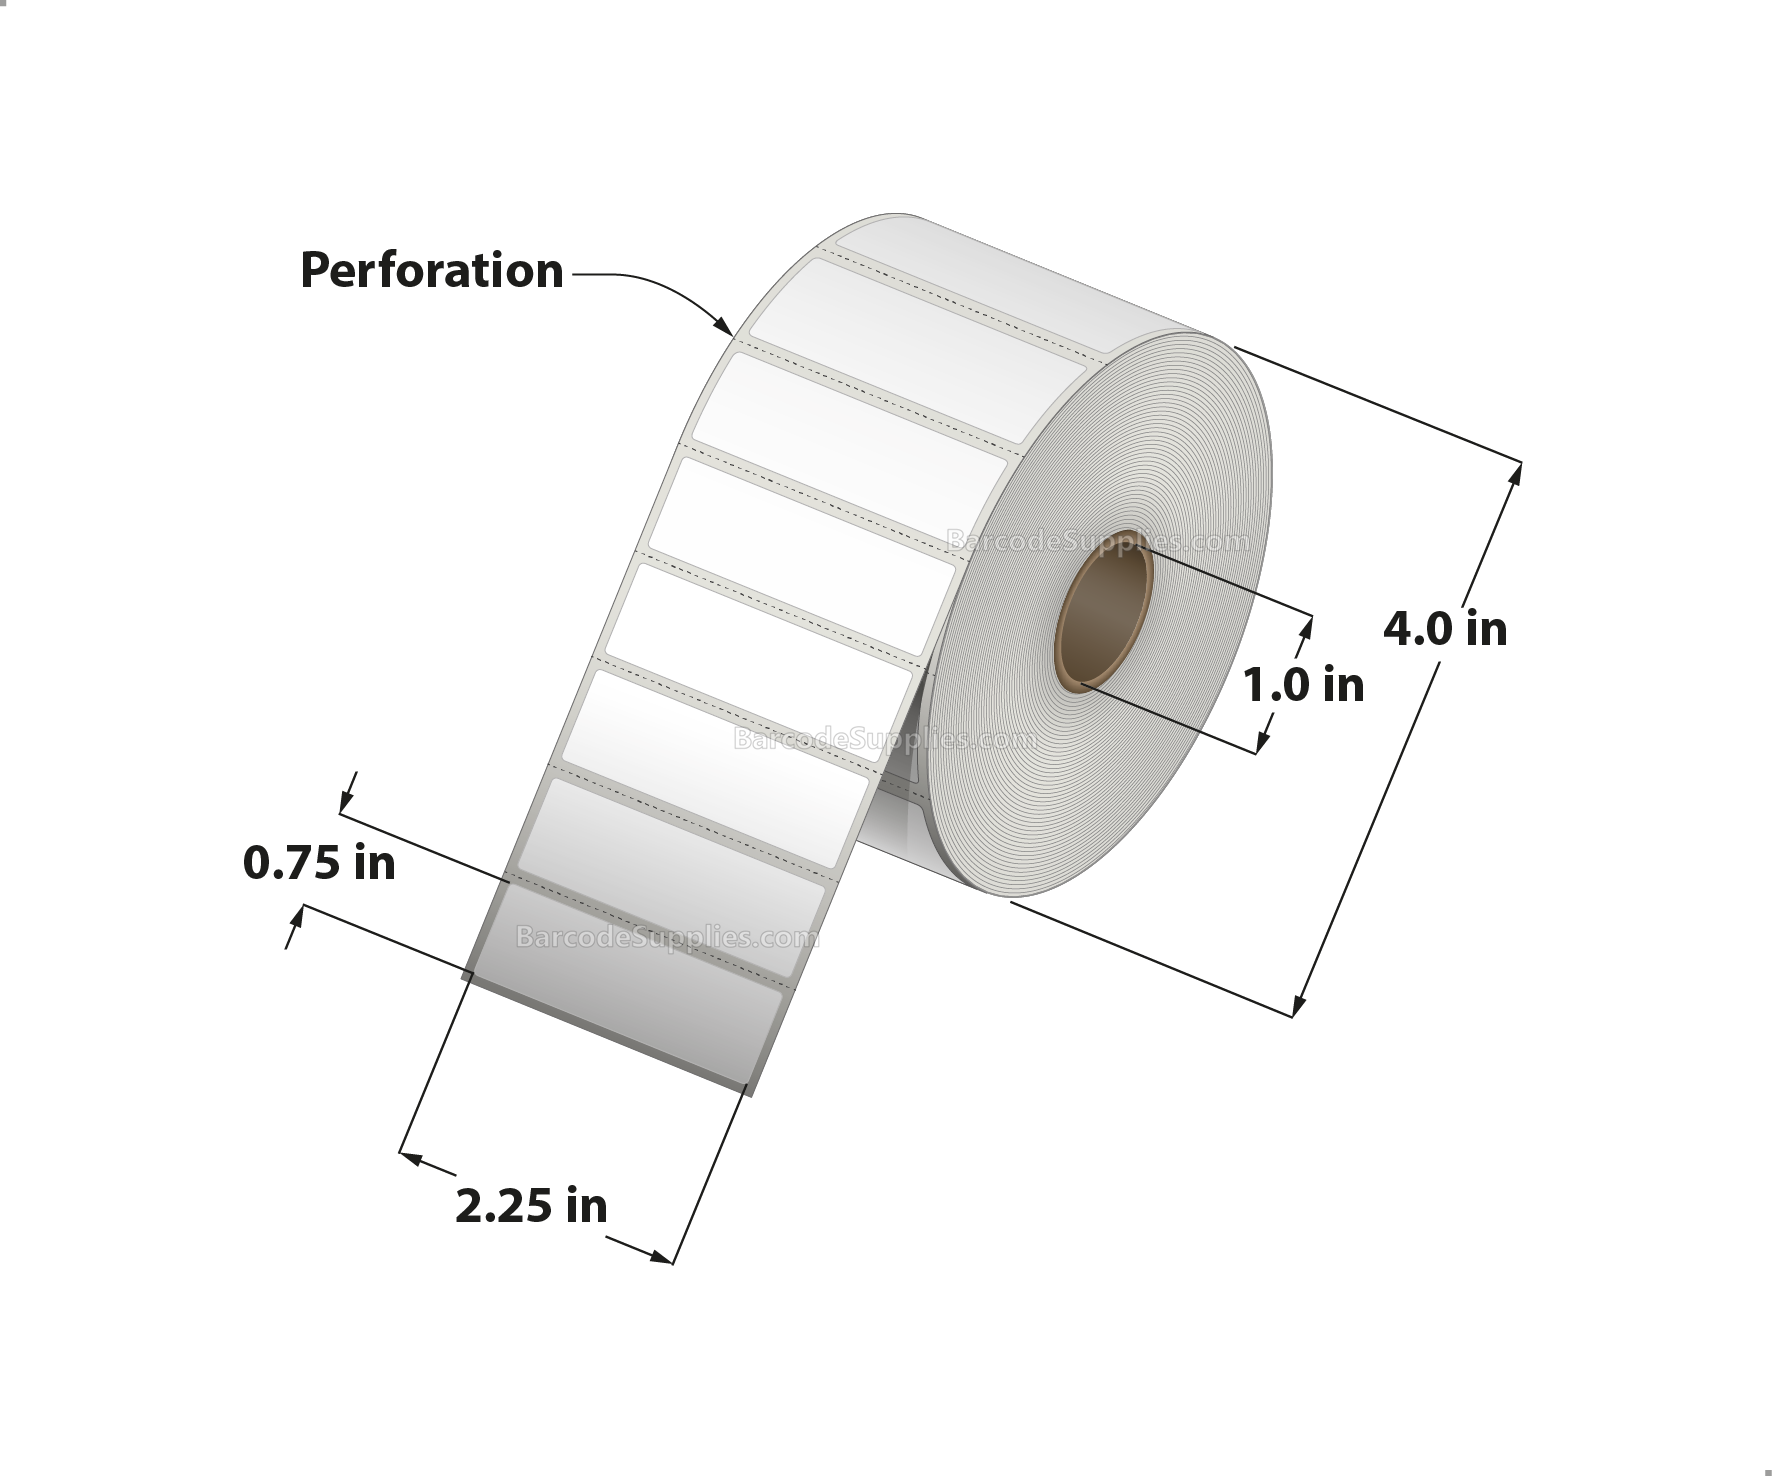 2.25 x 0.075 Thermal Transfer White Labels With Rubber Adhesive - Perforated - 1780 Labels Per Roll - Carton Of 12 Rolls - 21360 Labels Total - MPN: RTT4-225075-1P